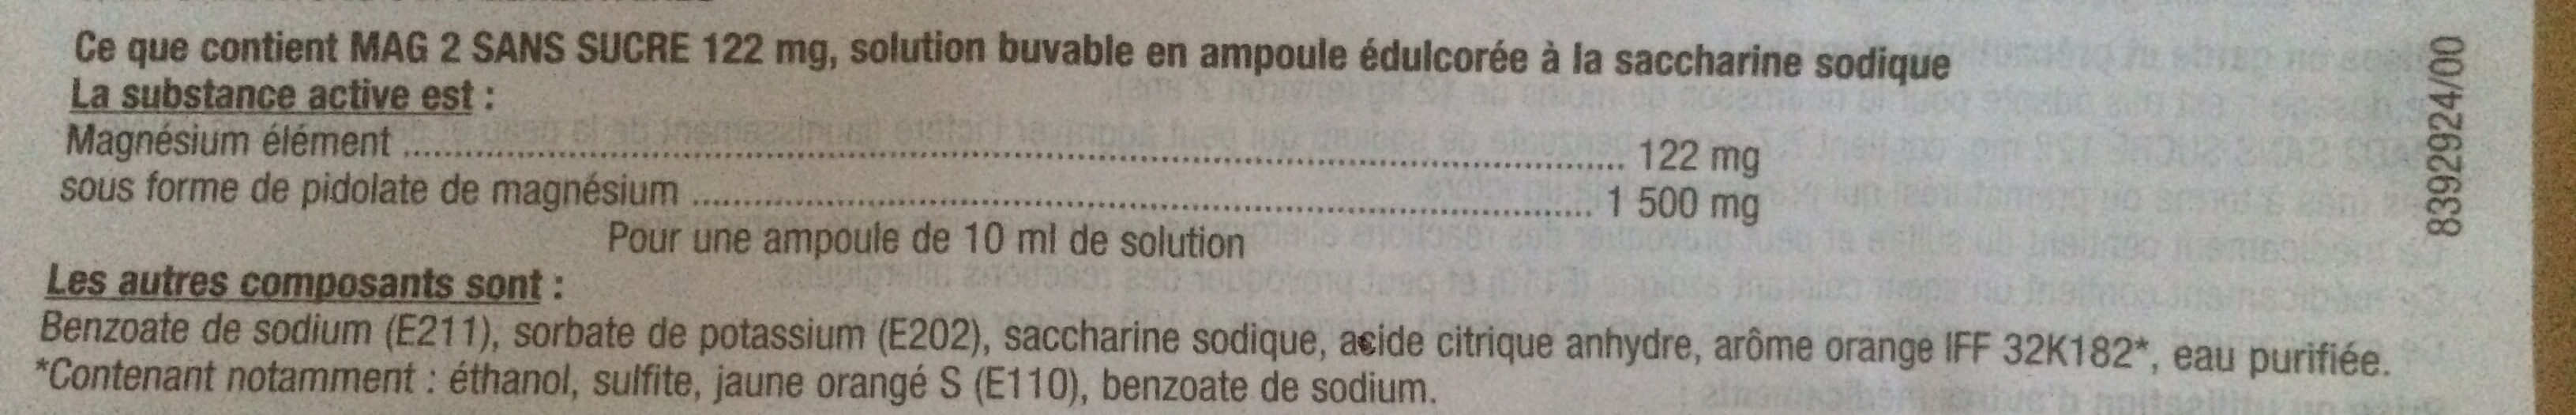 Mag 2 ampoules - Ingredients - fr